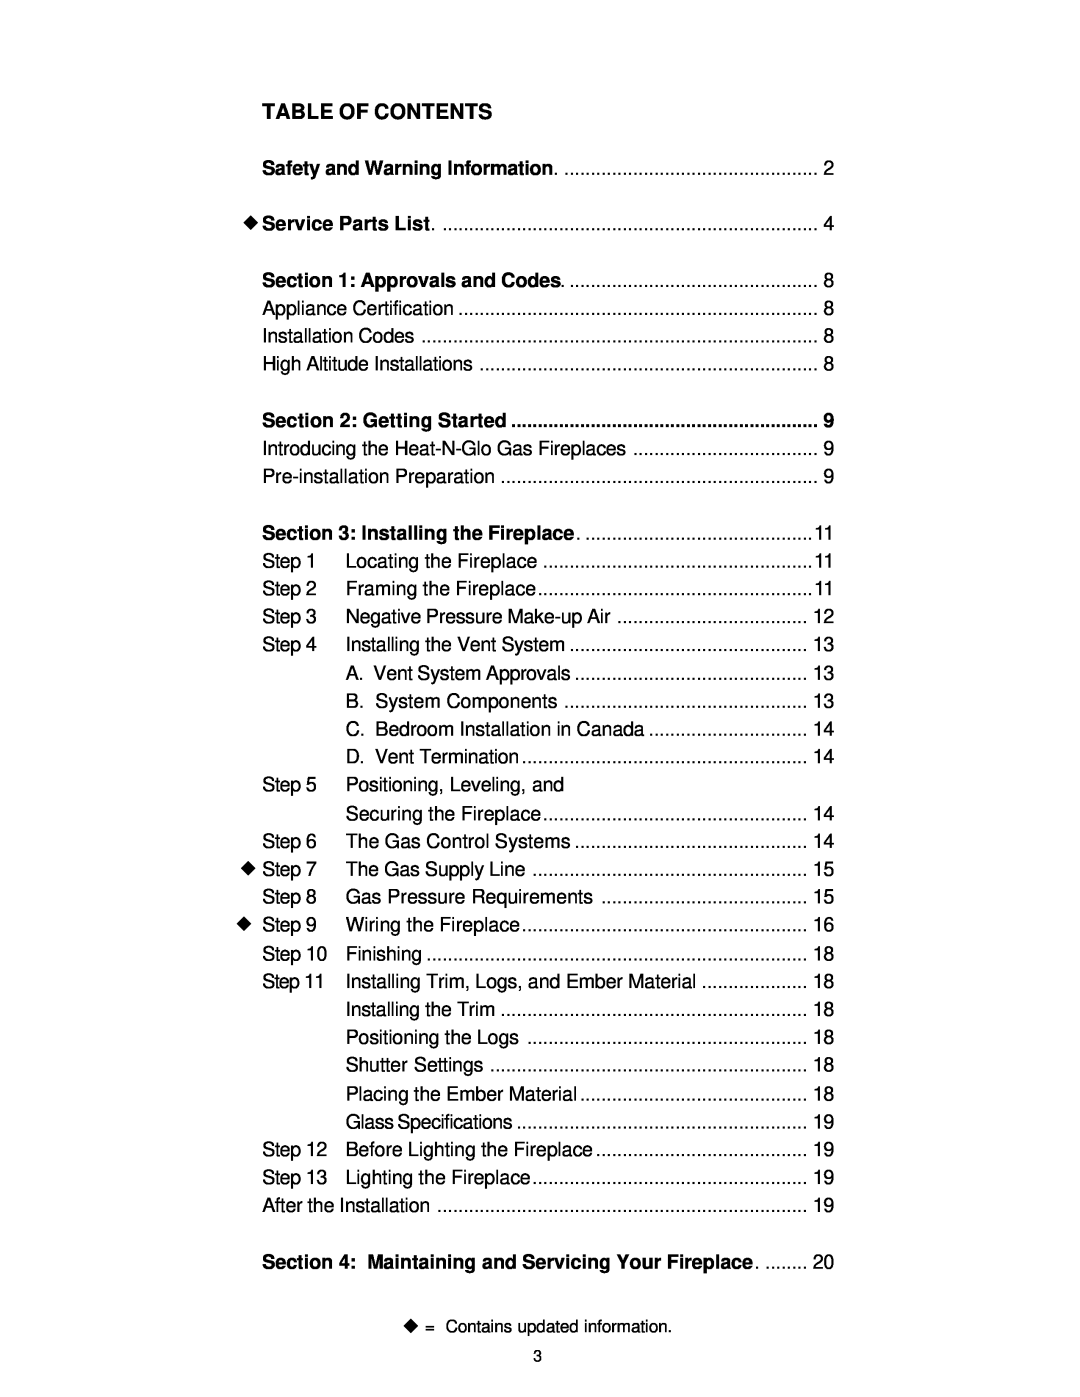 Heat & Glo LifeStyle 8000TVD manual Table Of Contents 